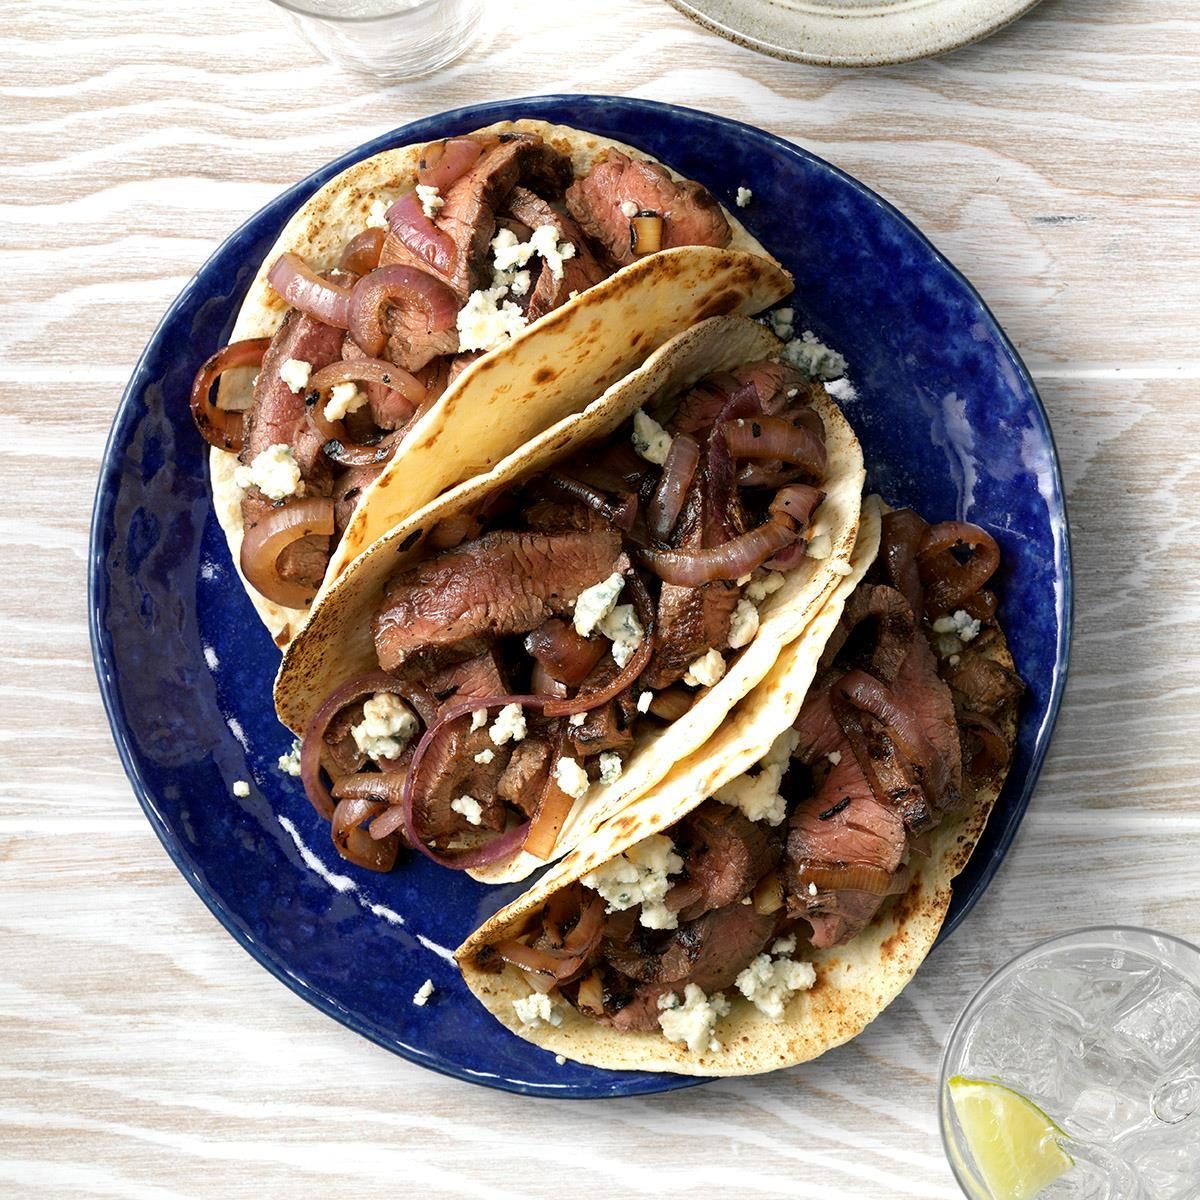 Grilled Beef And Blue Cheese Tacos Exps Tham19 174176 C11 08 3b 2